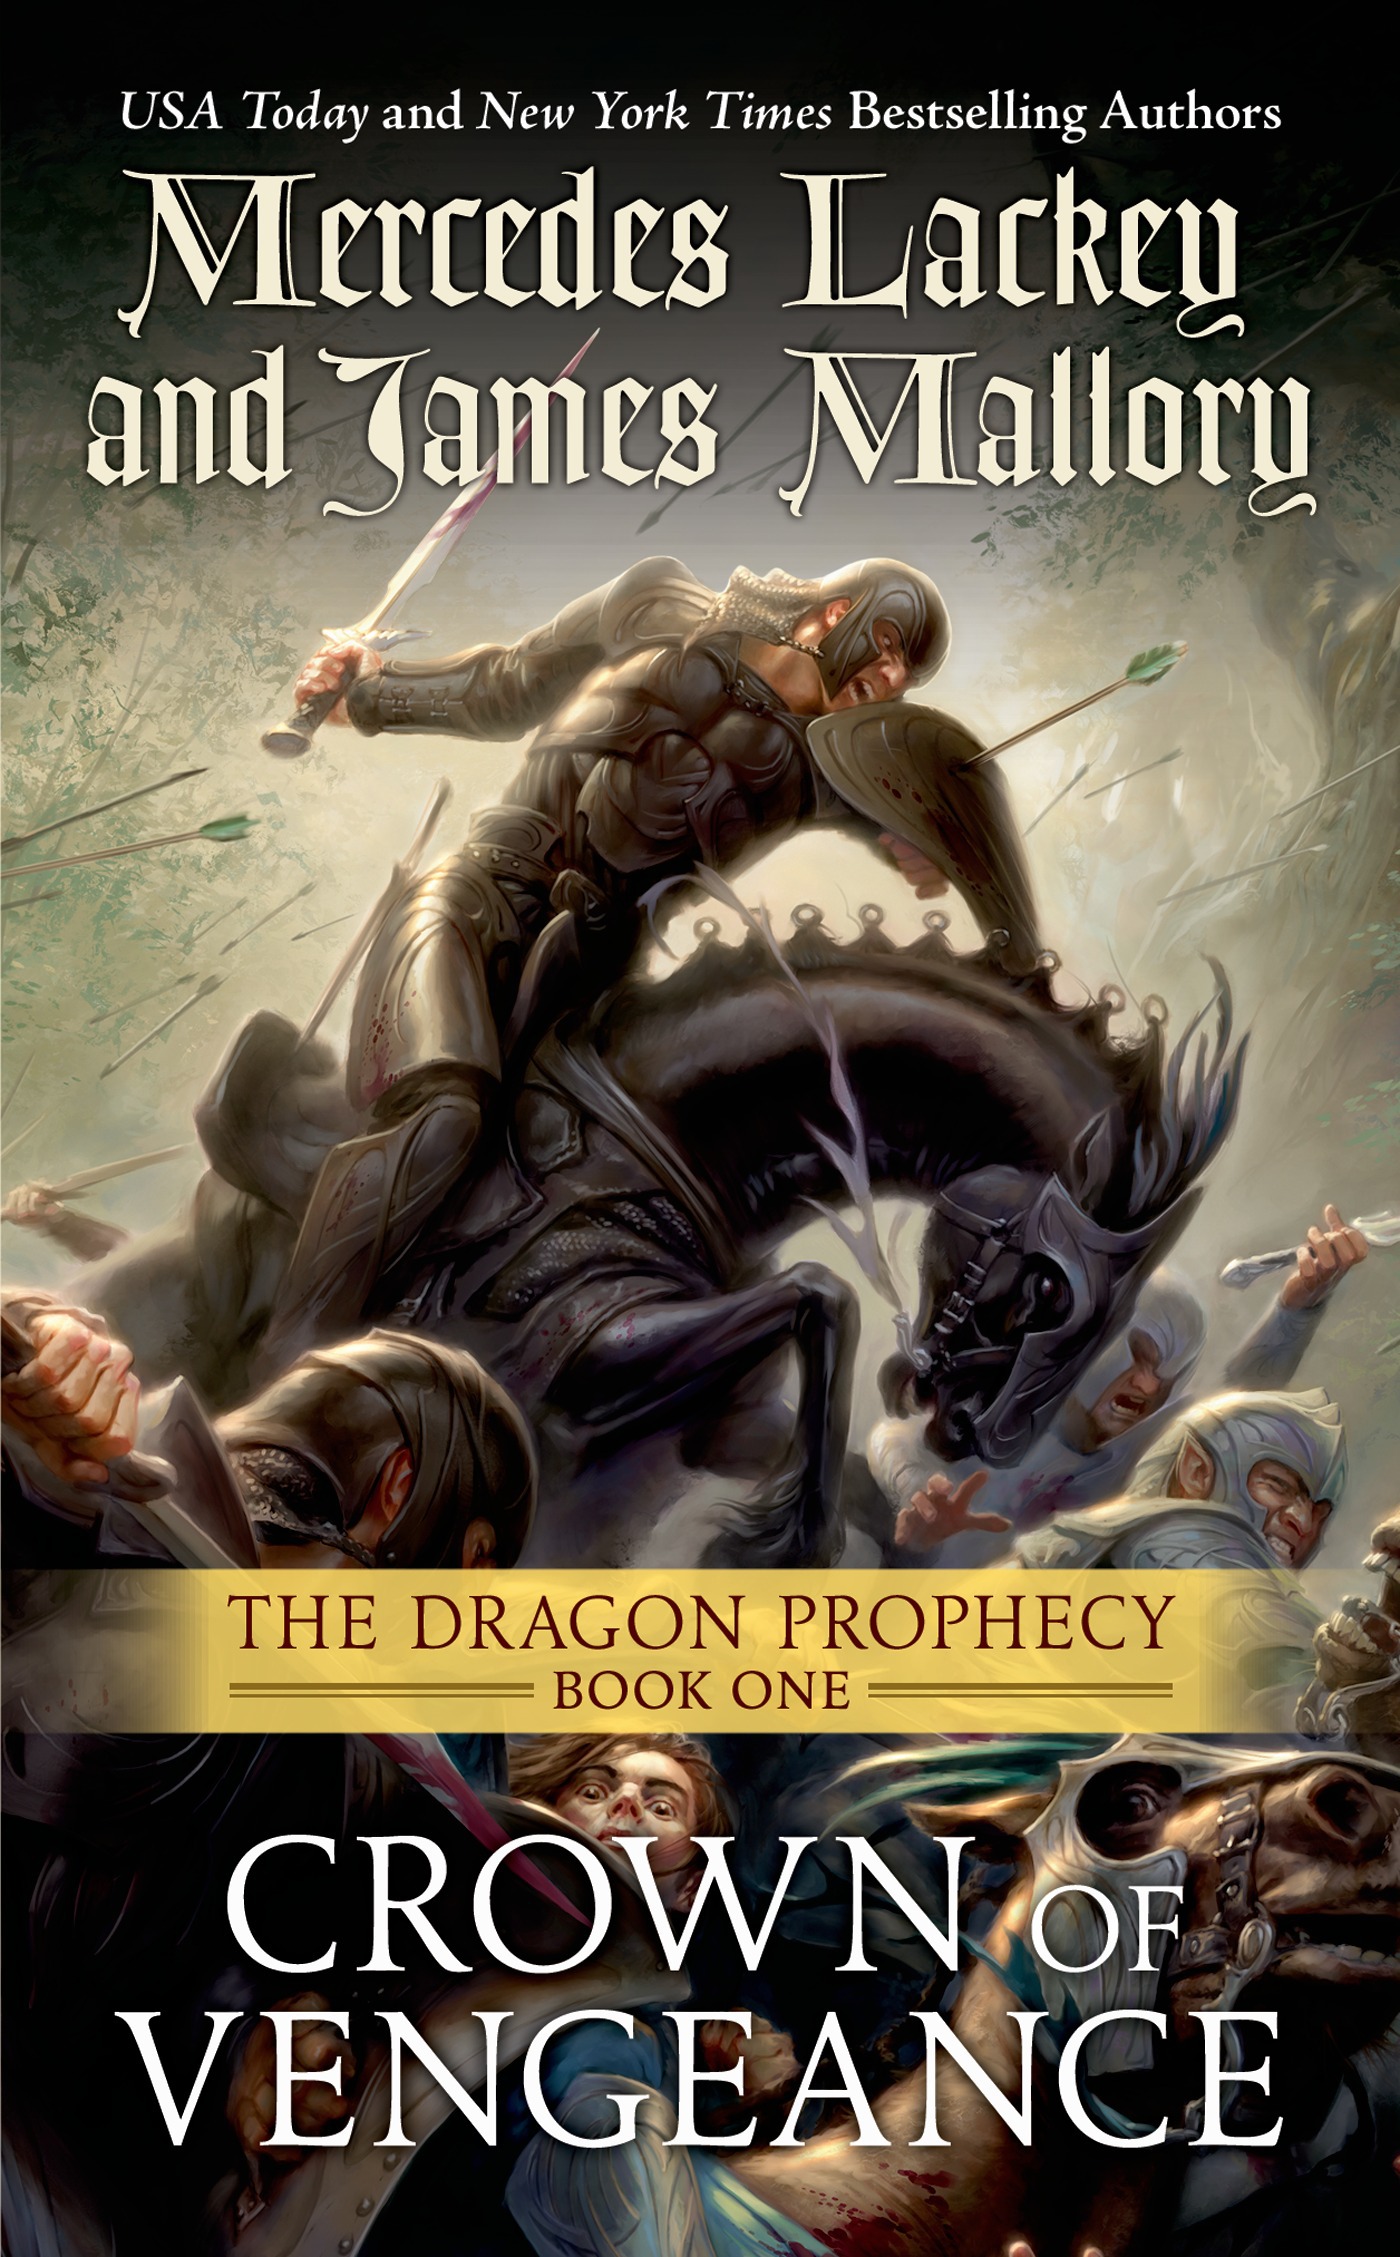 Crown of Vengeance : Book One of the Dragon Prophecy by Mercedes Lackey, James Mallory